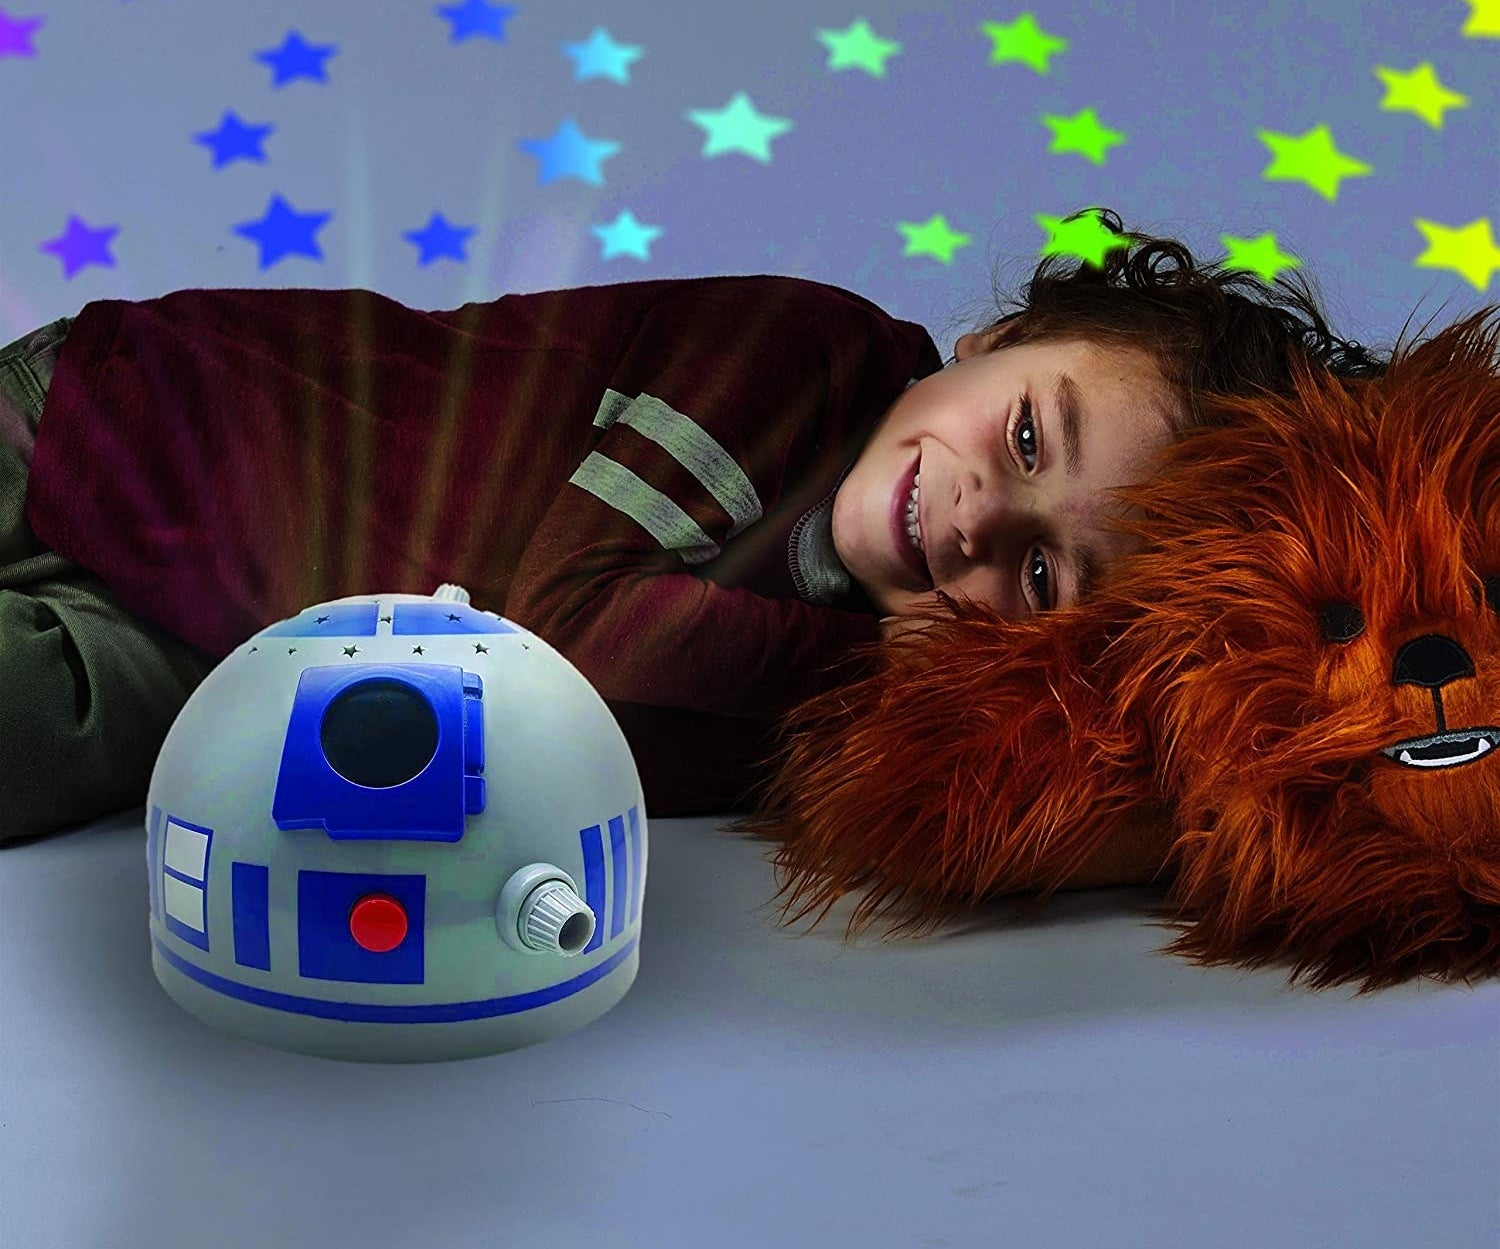 Child model with R2D2 light up pillow